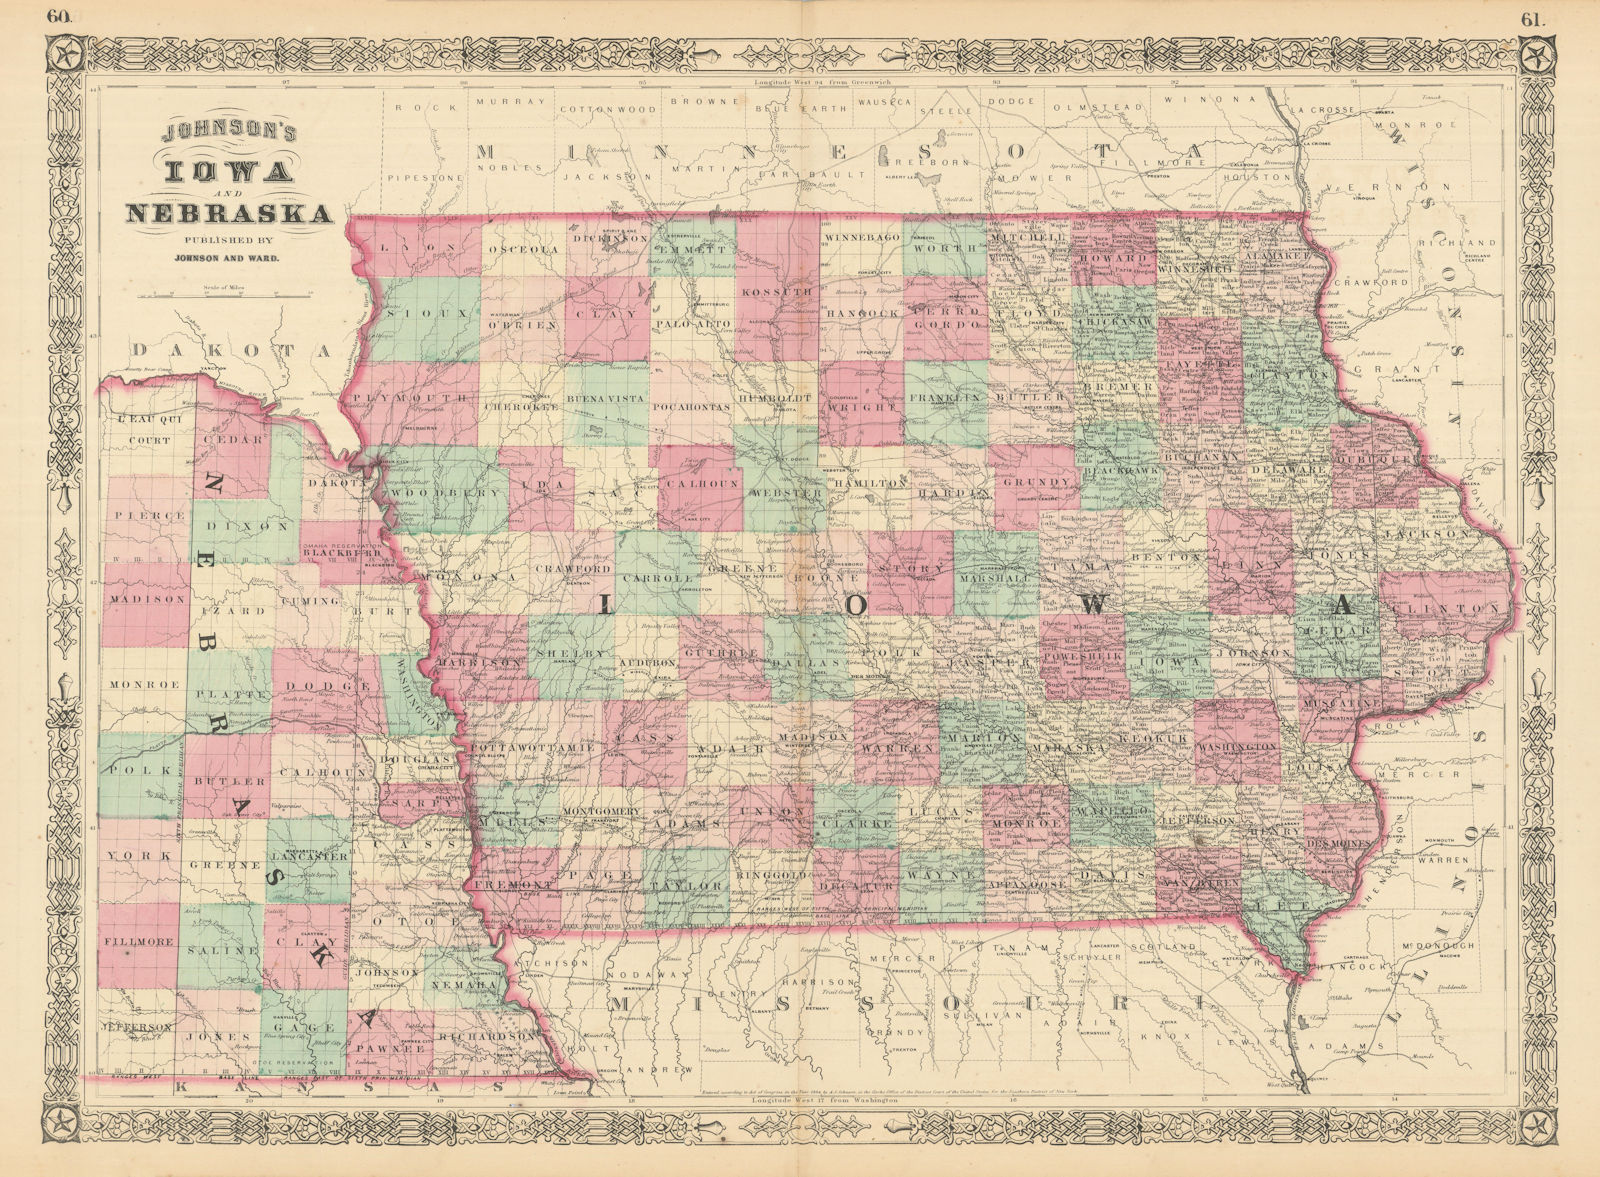 Johnson's Iowa & Nebraska. US state map showing counties 1866 old antique